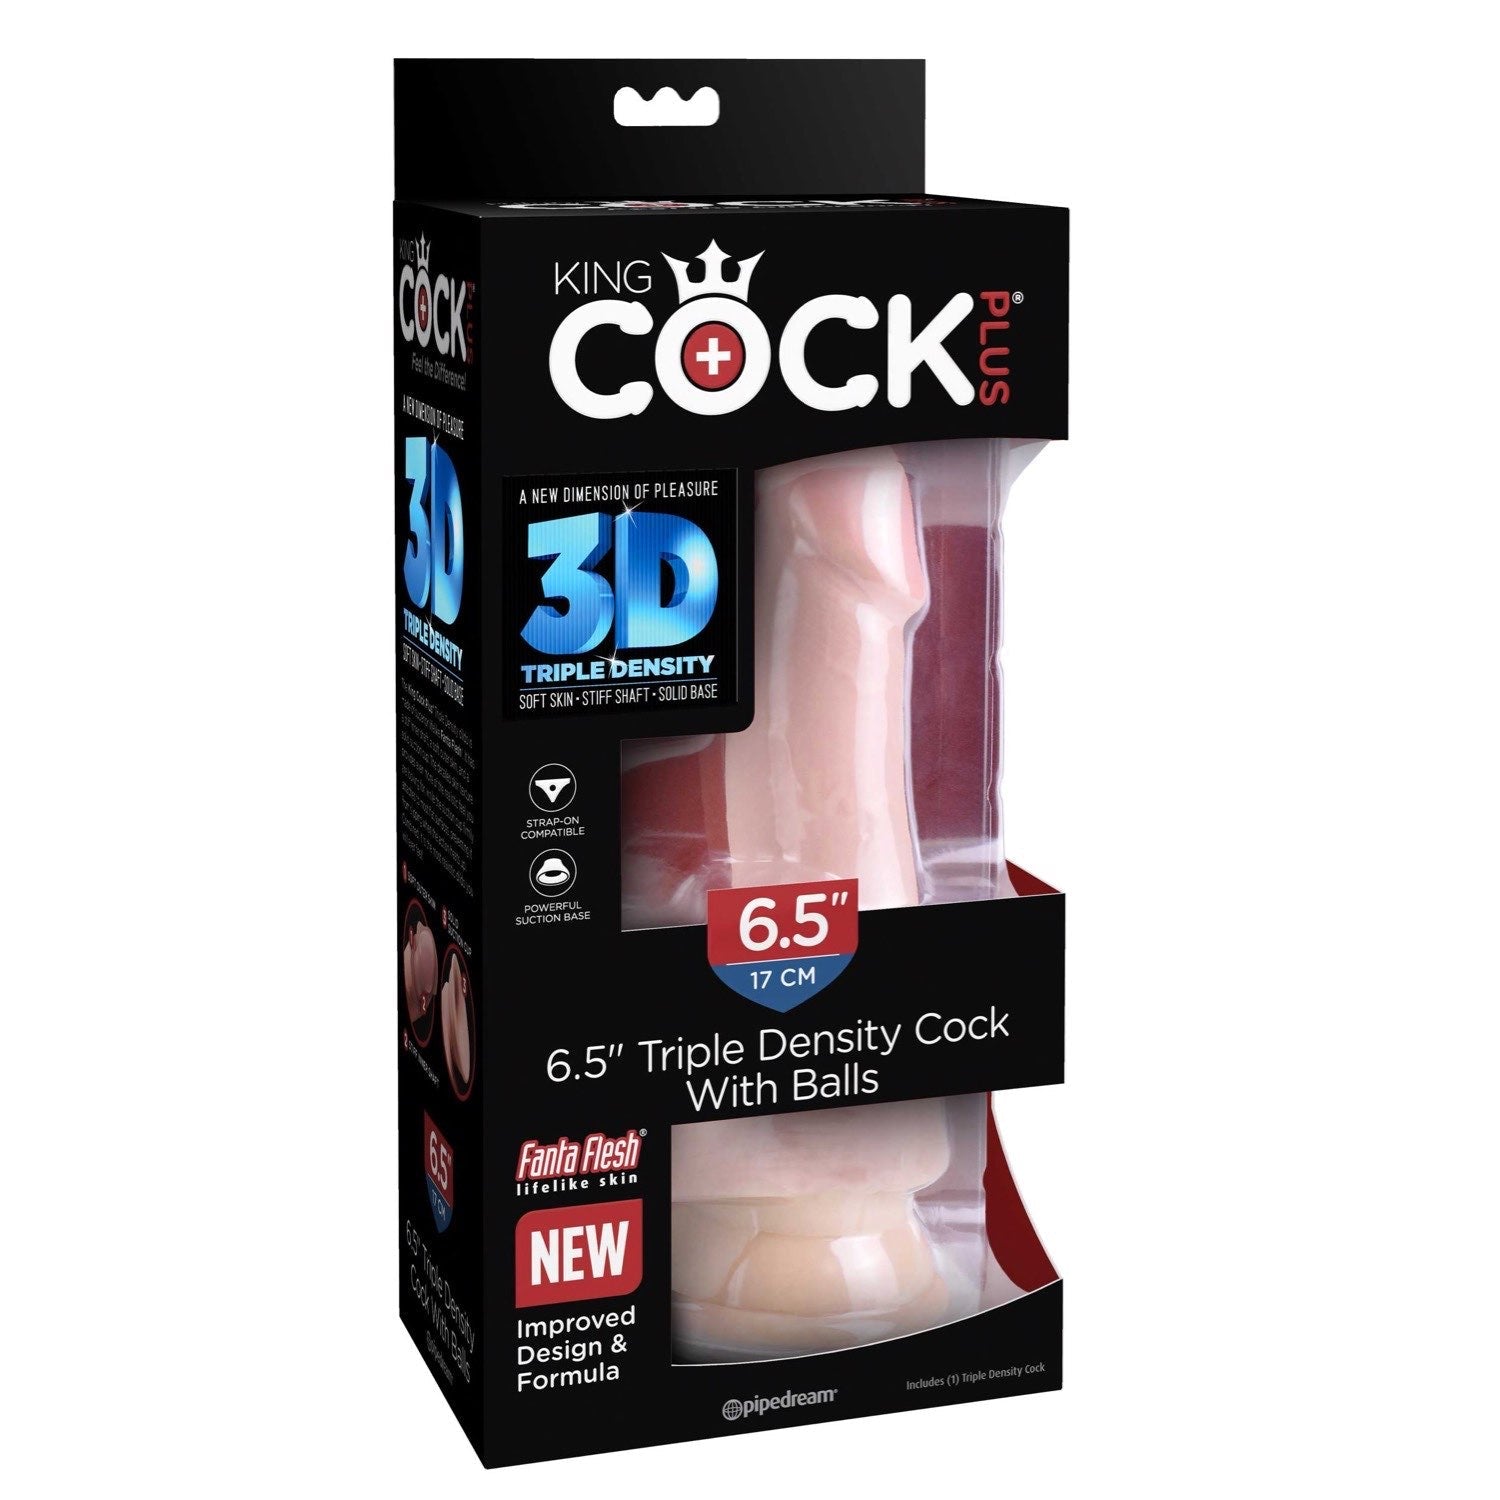 King Cock Plus 6.5&quot; Triple Density Cock with Balls - Flesh 16.5 cm Dong by Pipedream